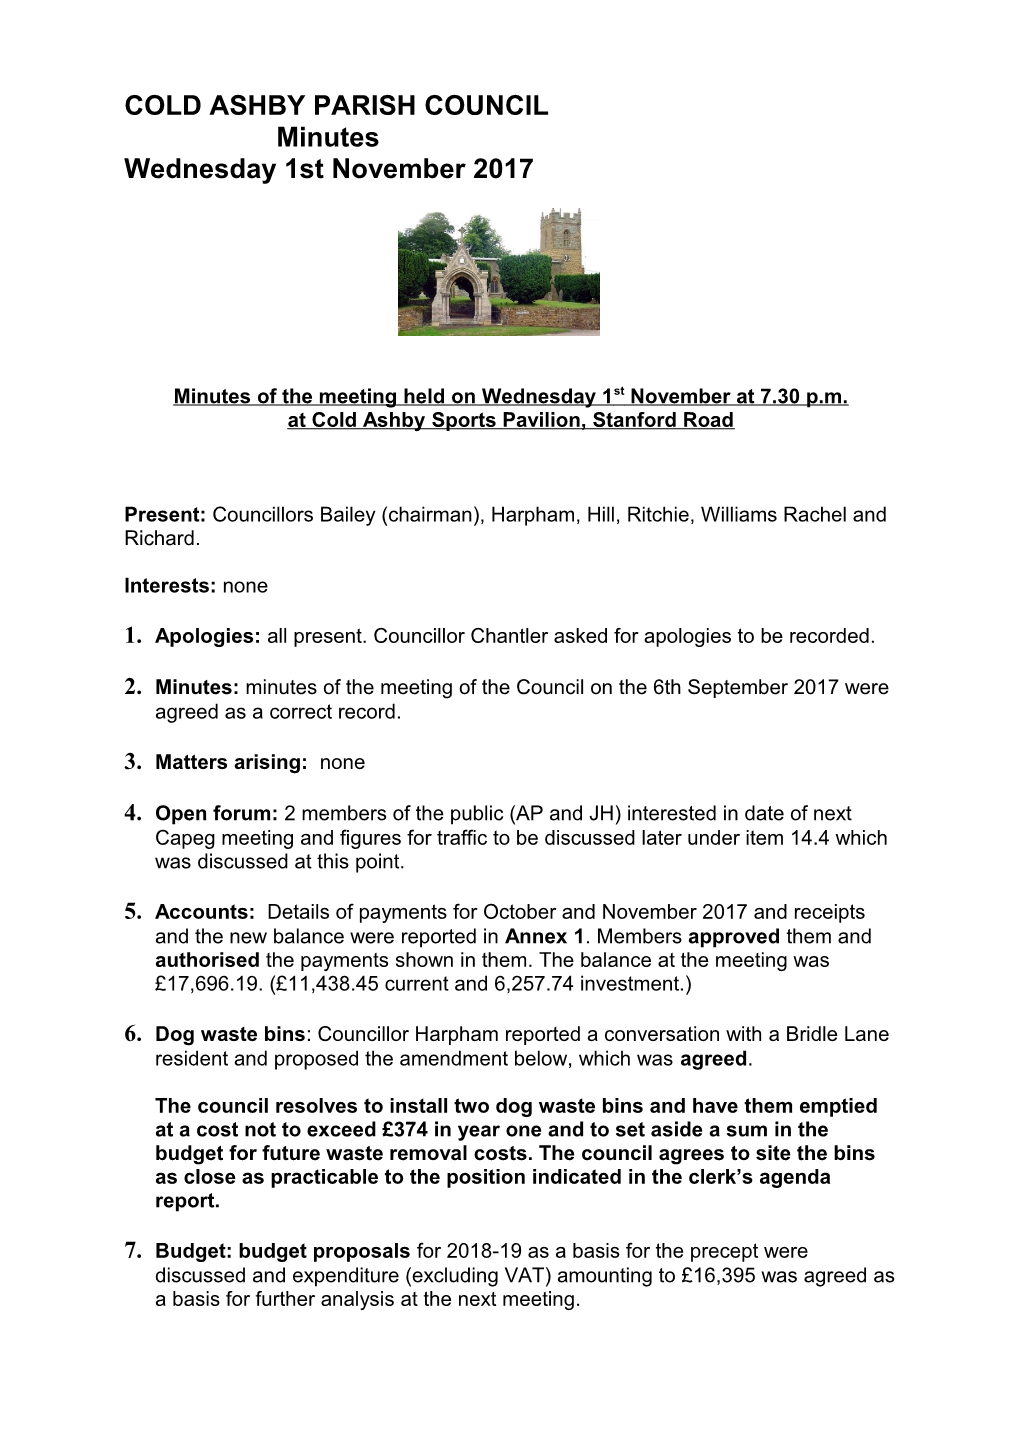 Minutes of the Meeting Held on Wednesday1stnovember at 7.30 P.M